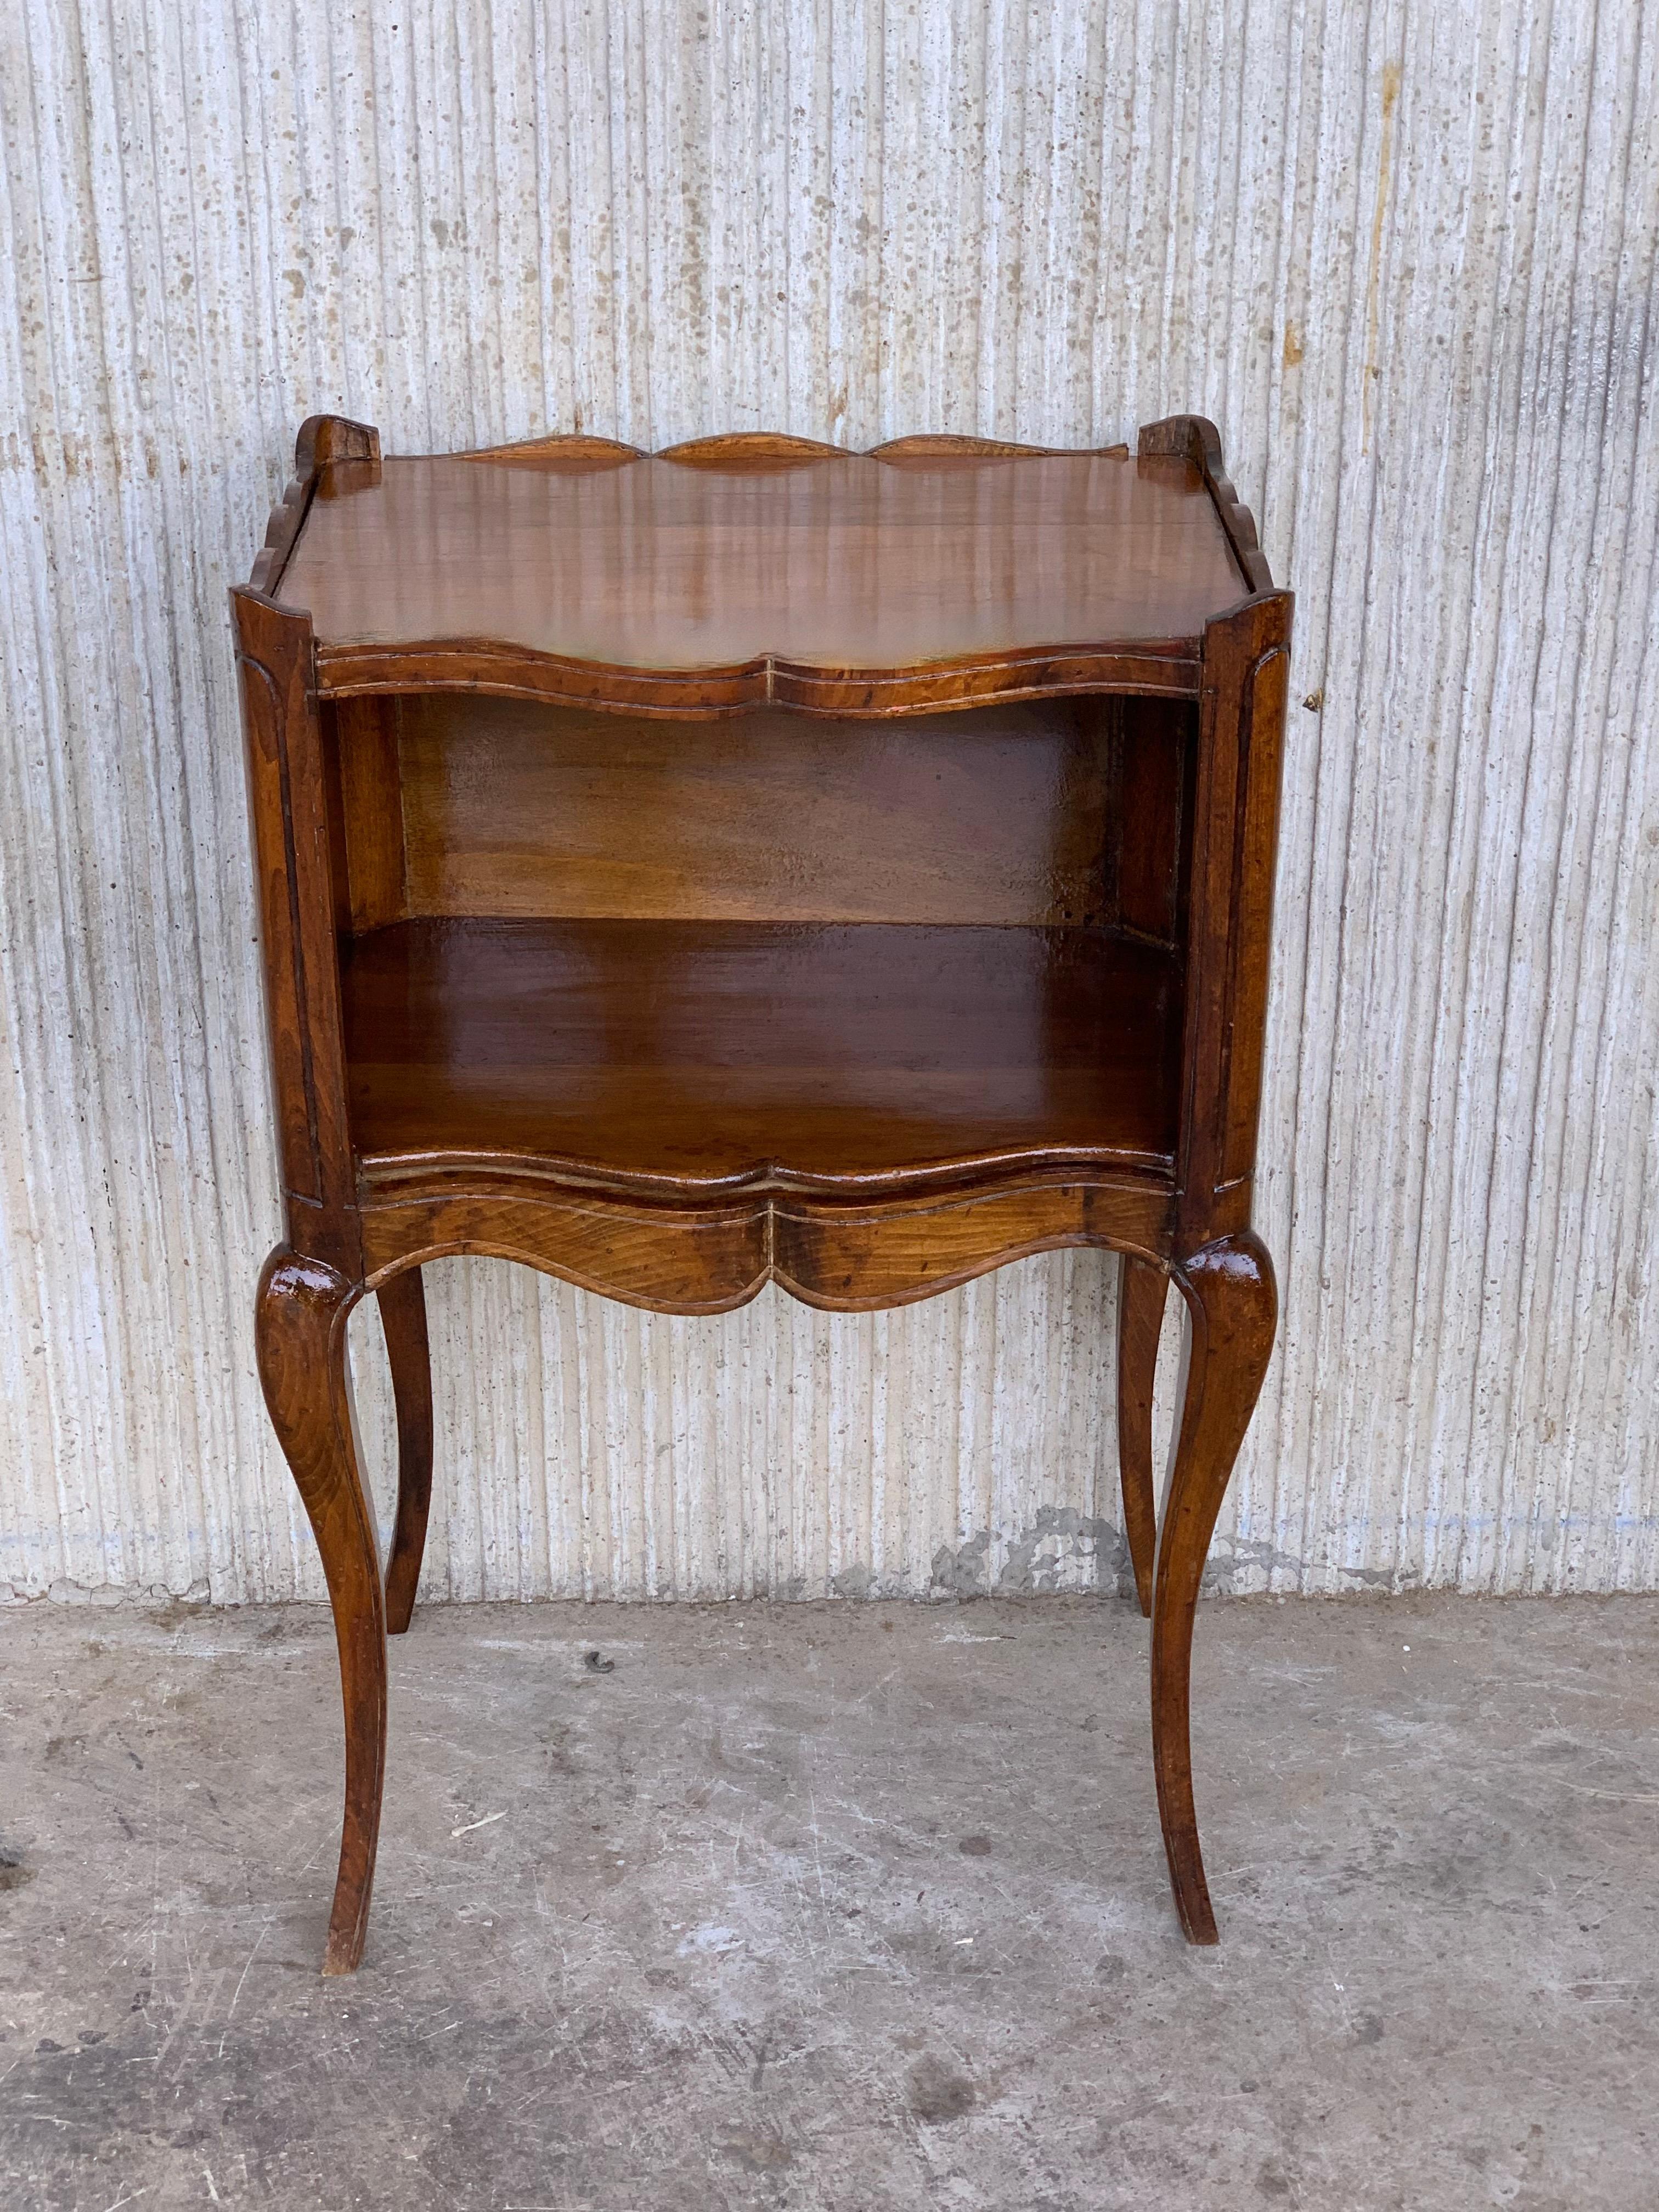 French Louis XV Style 19th Century Wooden Bedside Table with Open Shelf In Good Condition For Sale In Miami, FL